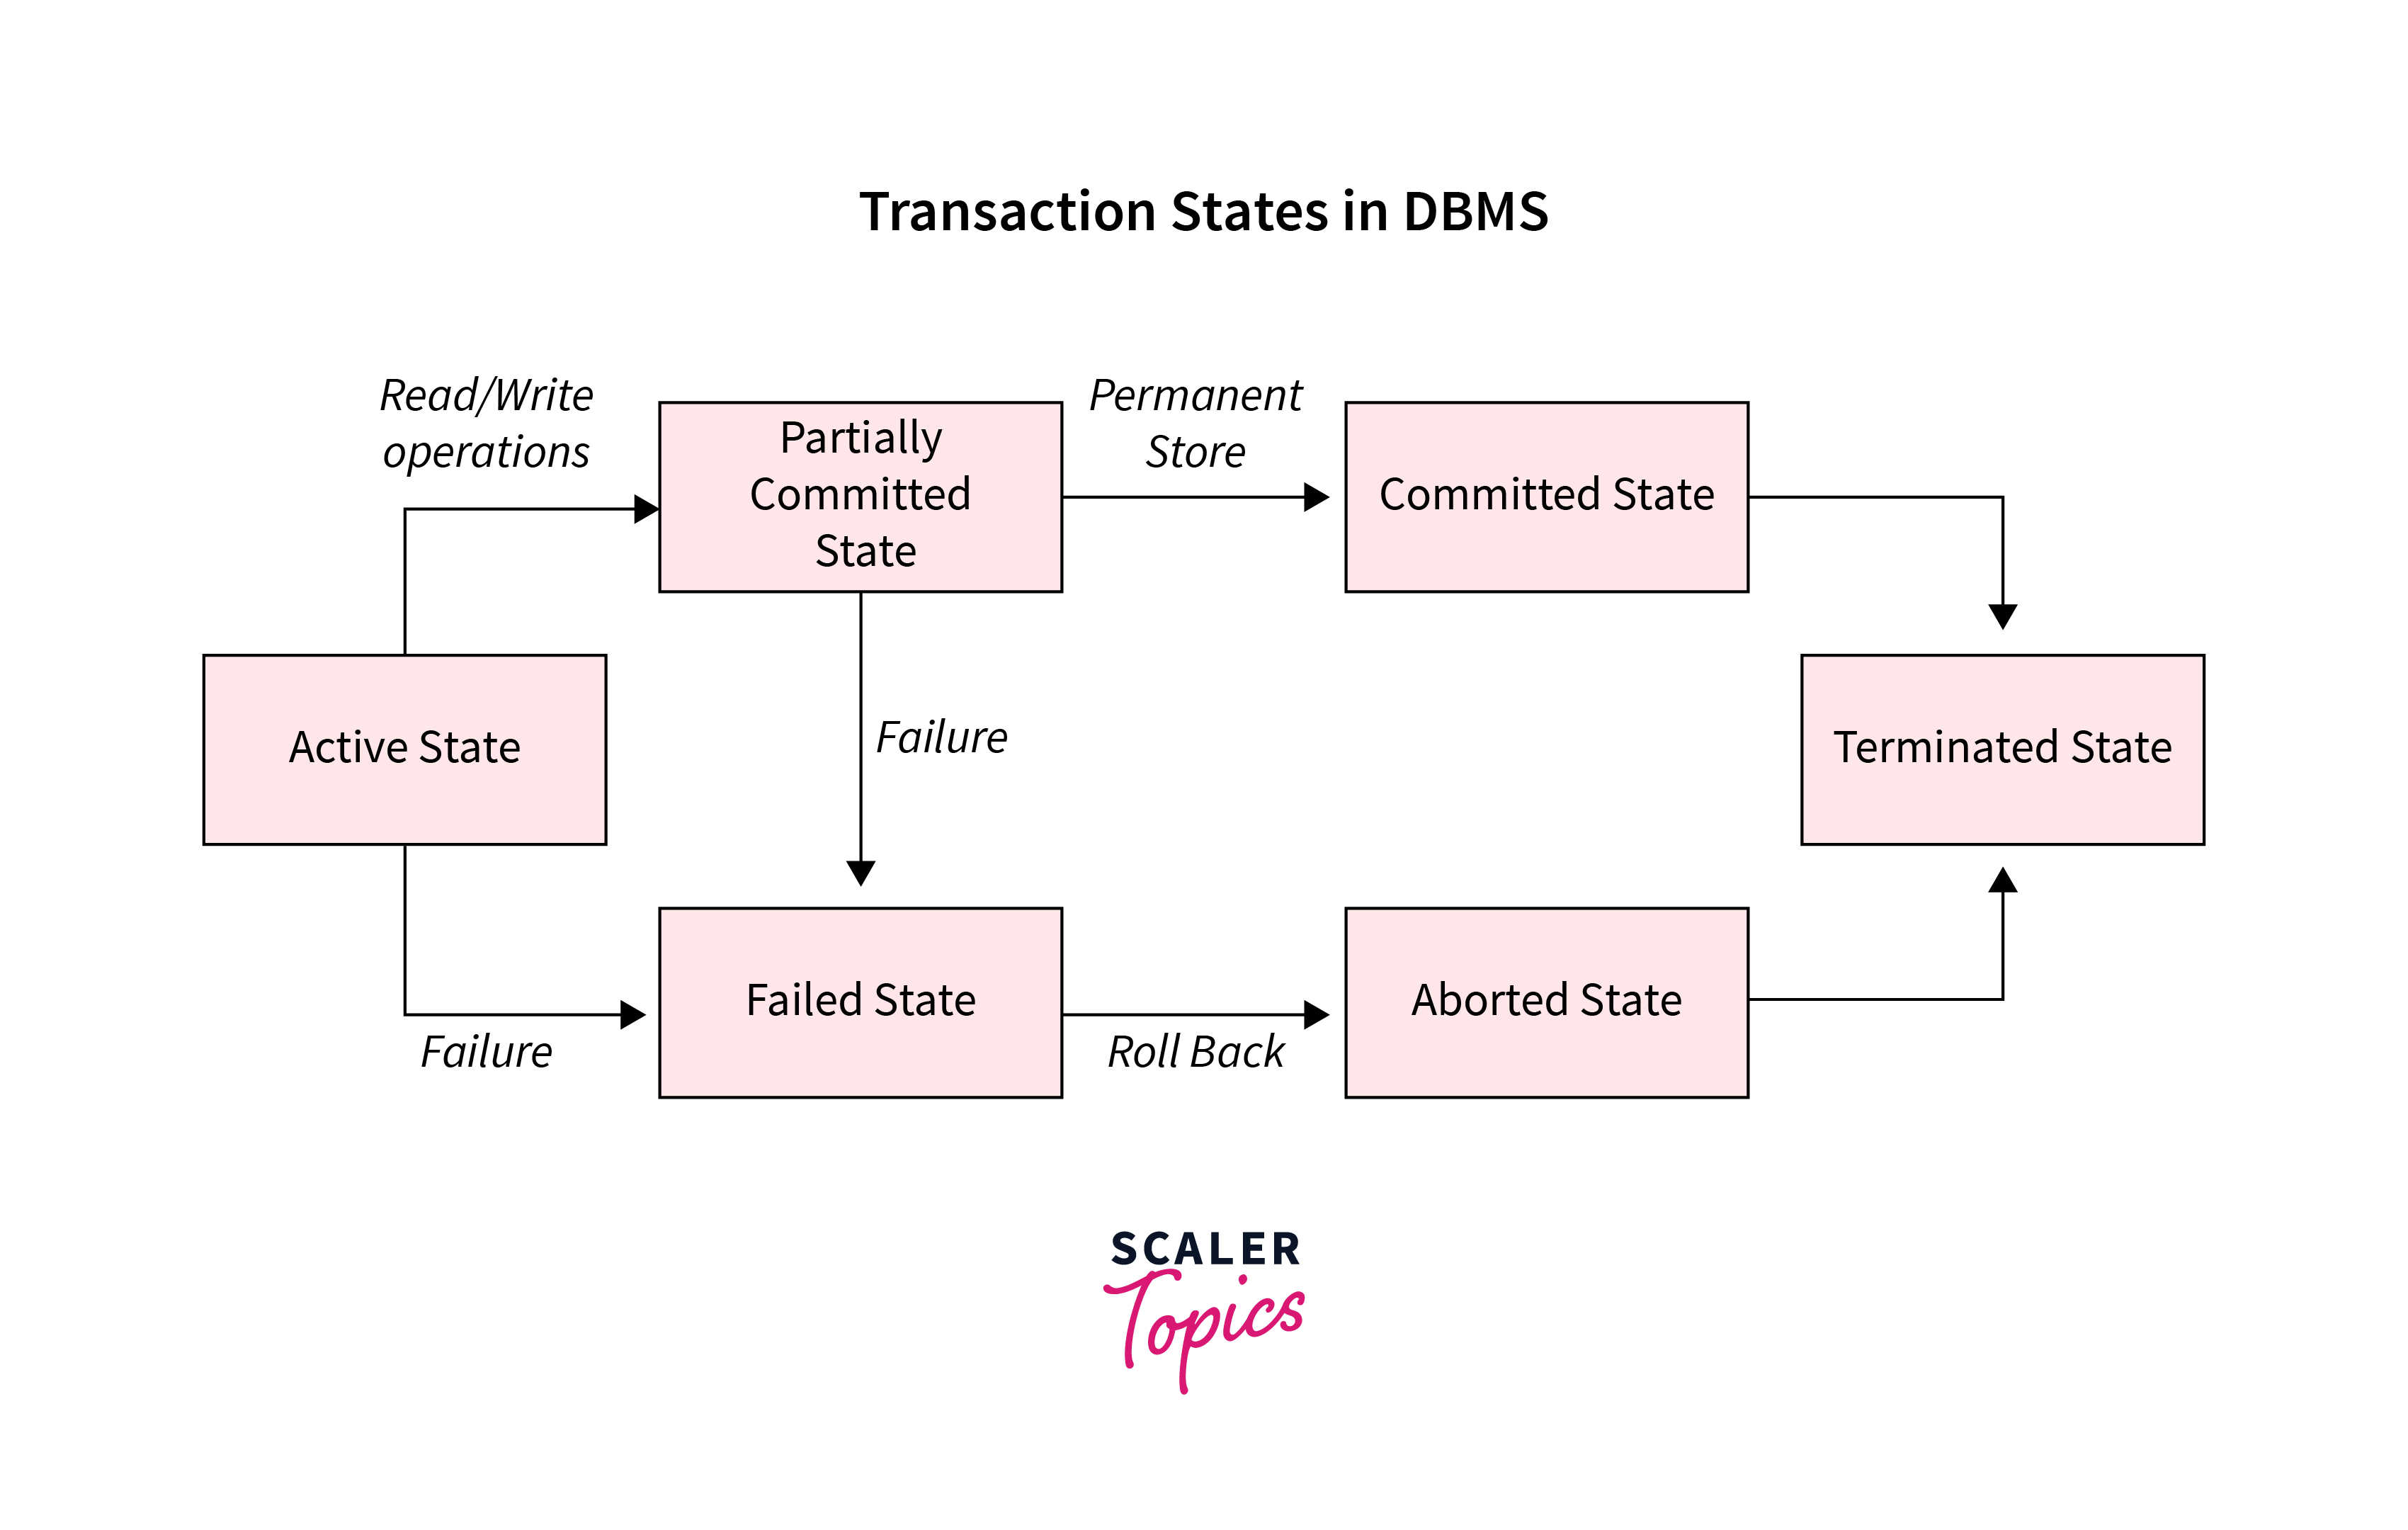 Transaction State of Acid properties in DBMS